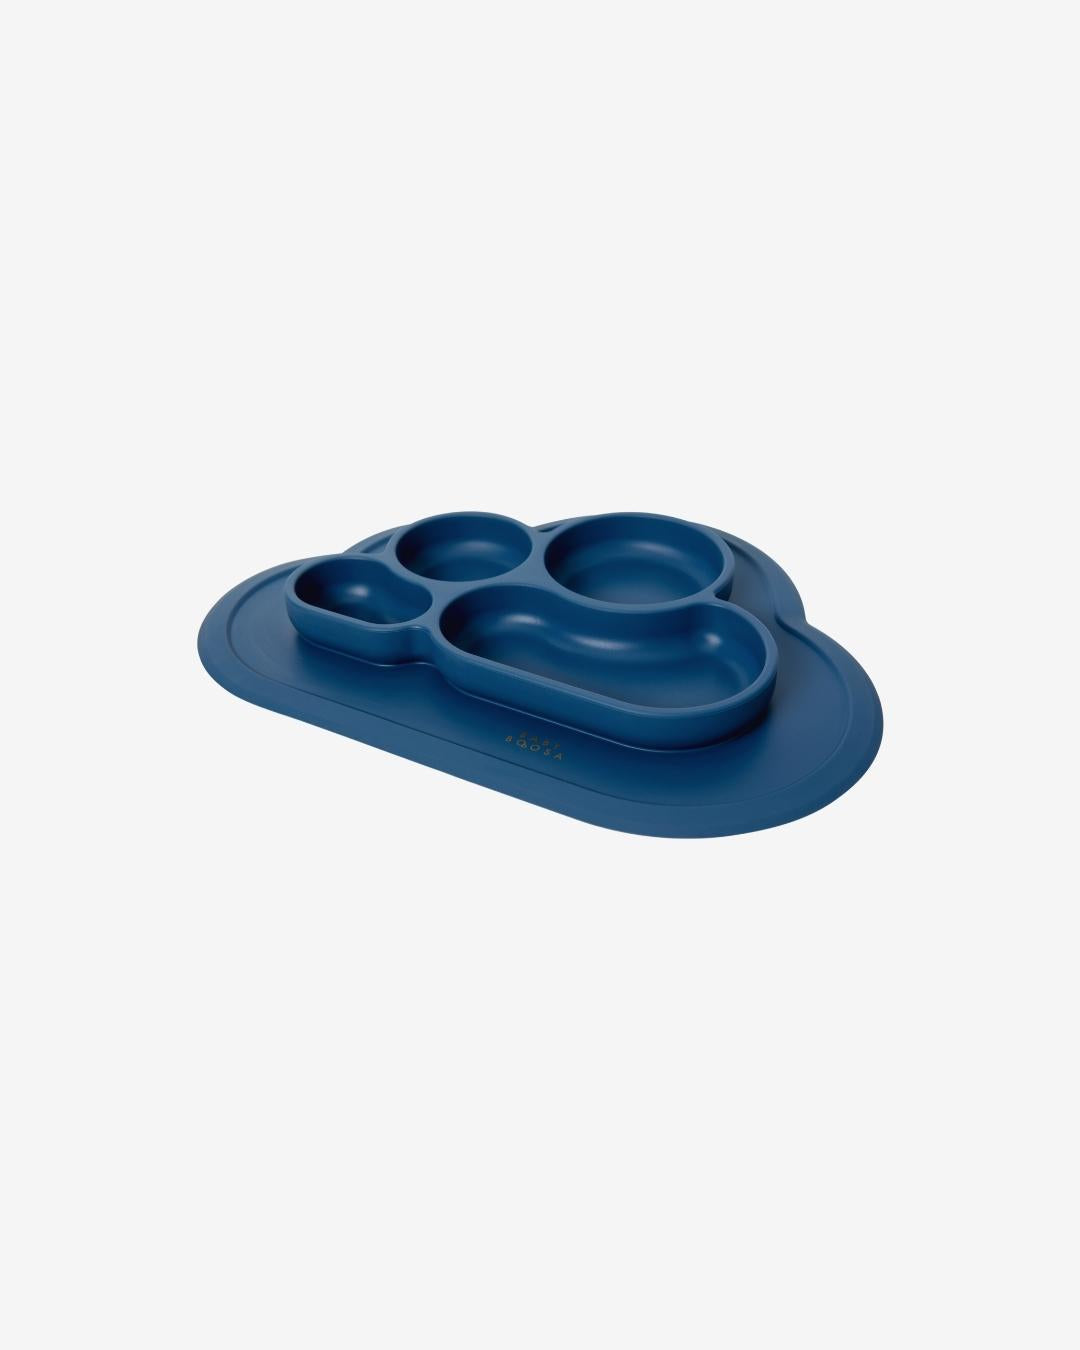 Weaning Cloud Plate Mat | Grippy Suction | Non-slip | Catch-food | Side scoops | Easy clean (Riviera Blue)